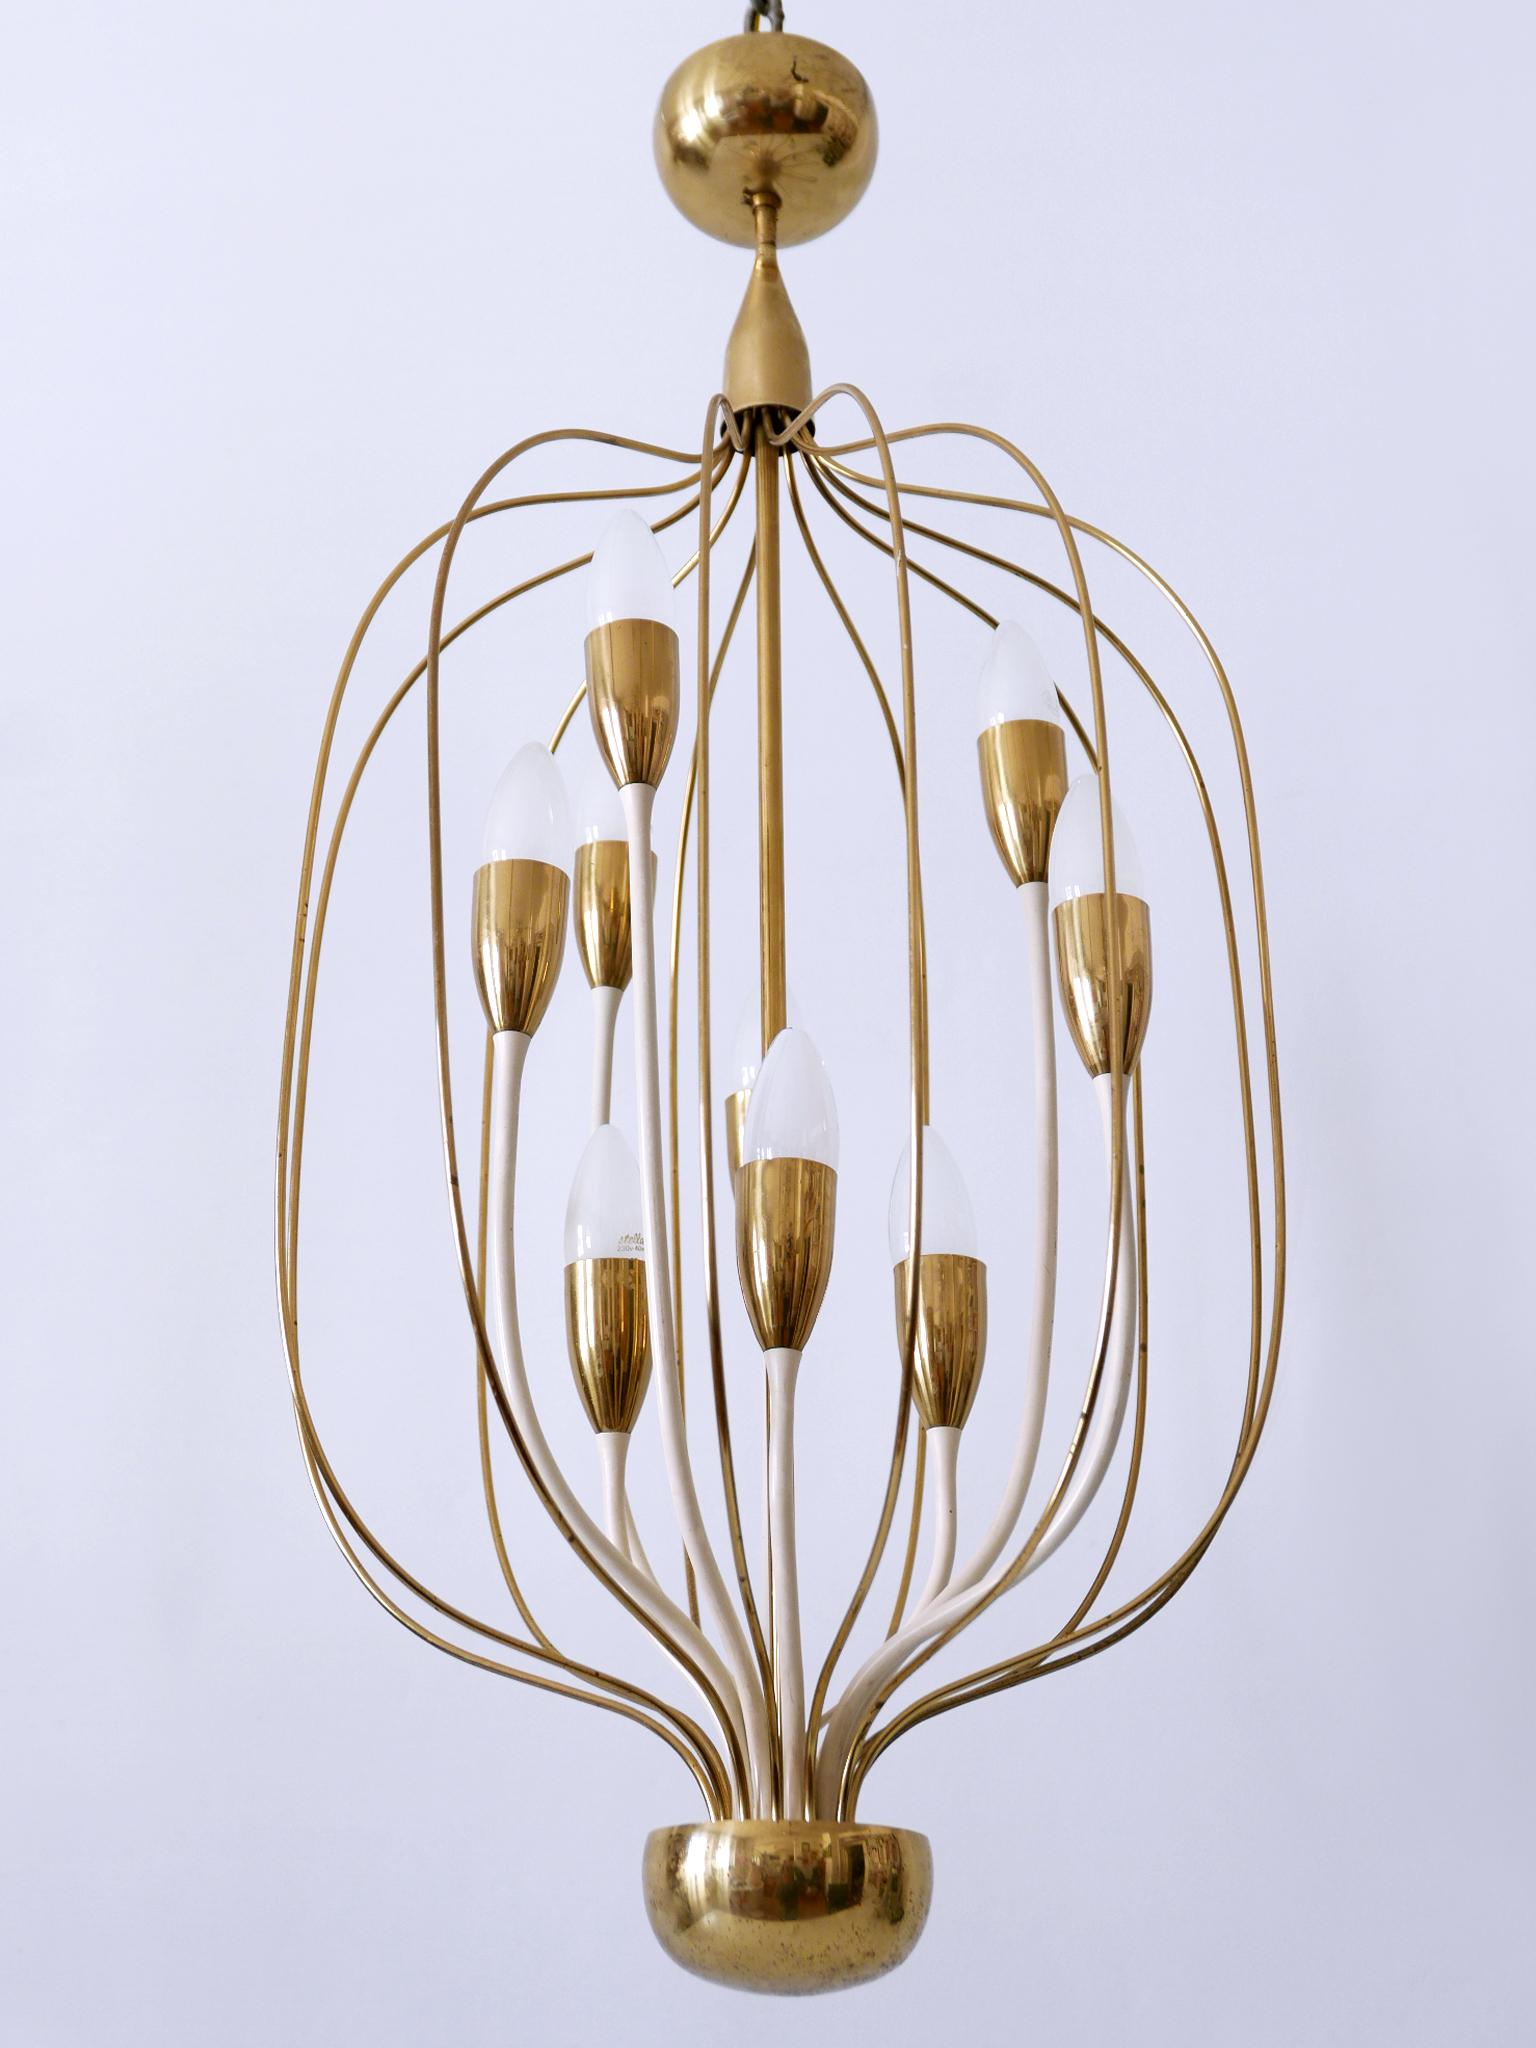 Exceptional Mid-Century Modern Nine-Flamed Chandelier or Pendant Lamp 1950s For Sale 3